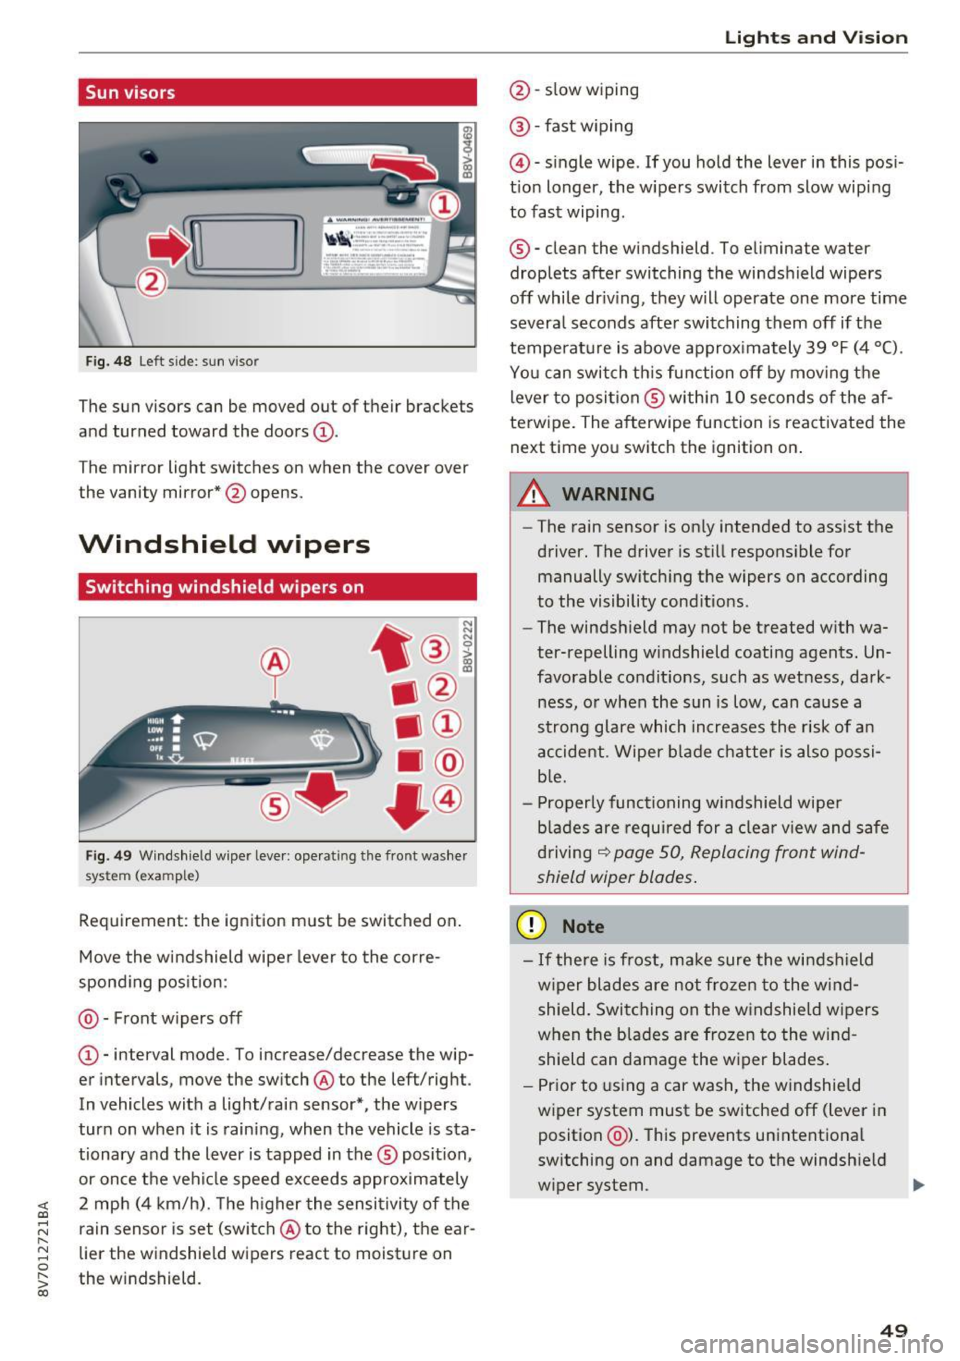 AUDI A3 CABRIOLET 2016  Owners Manual <( co ..... N 
" N ..... 0 r--. > 00 
Sun visors 
Fig.  48 Left s ide : sun  viso r 
The sun  visors  can  be  moved  out  of their  brackets 
and  turned  toward  the  doors 
(D. 
The  mirror  light 